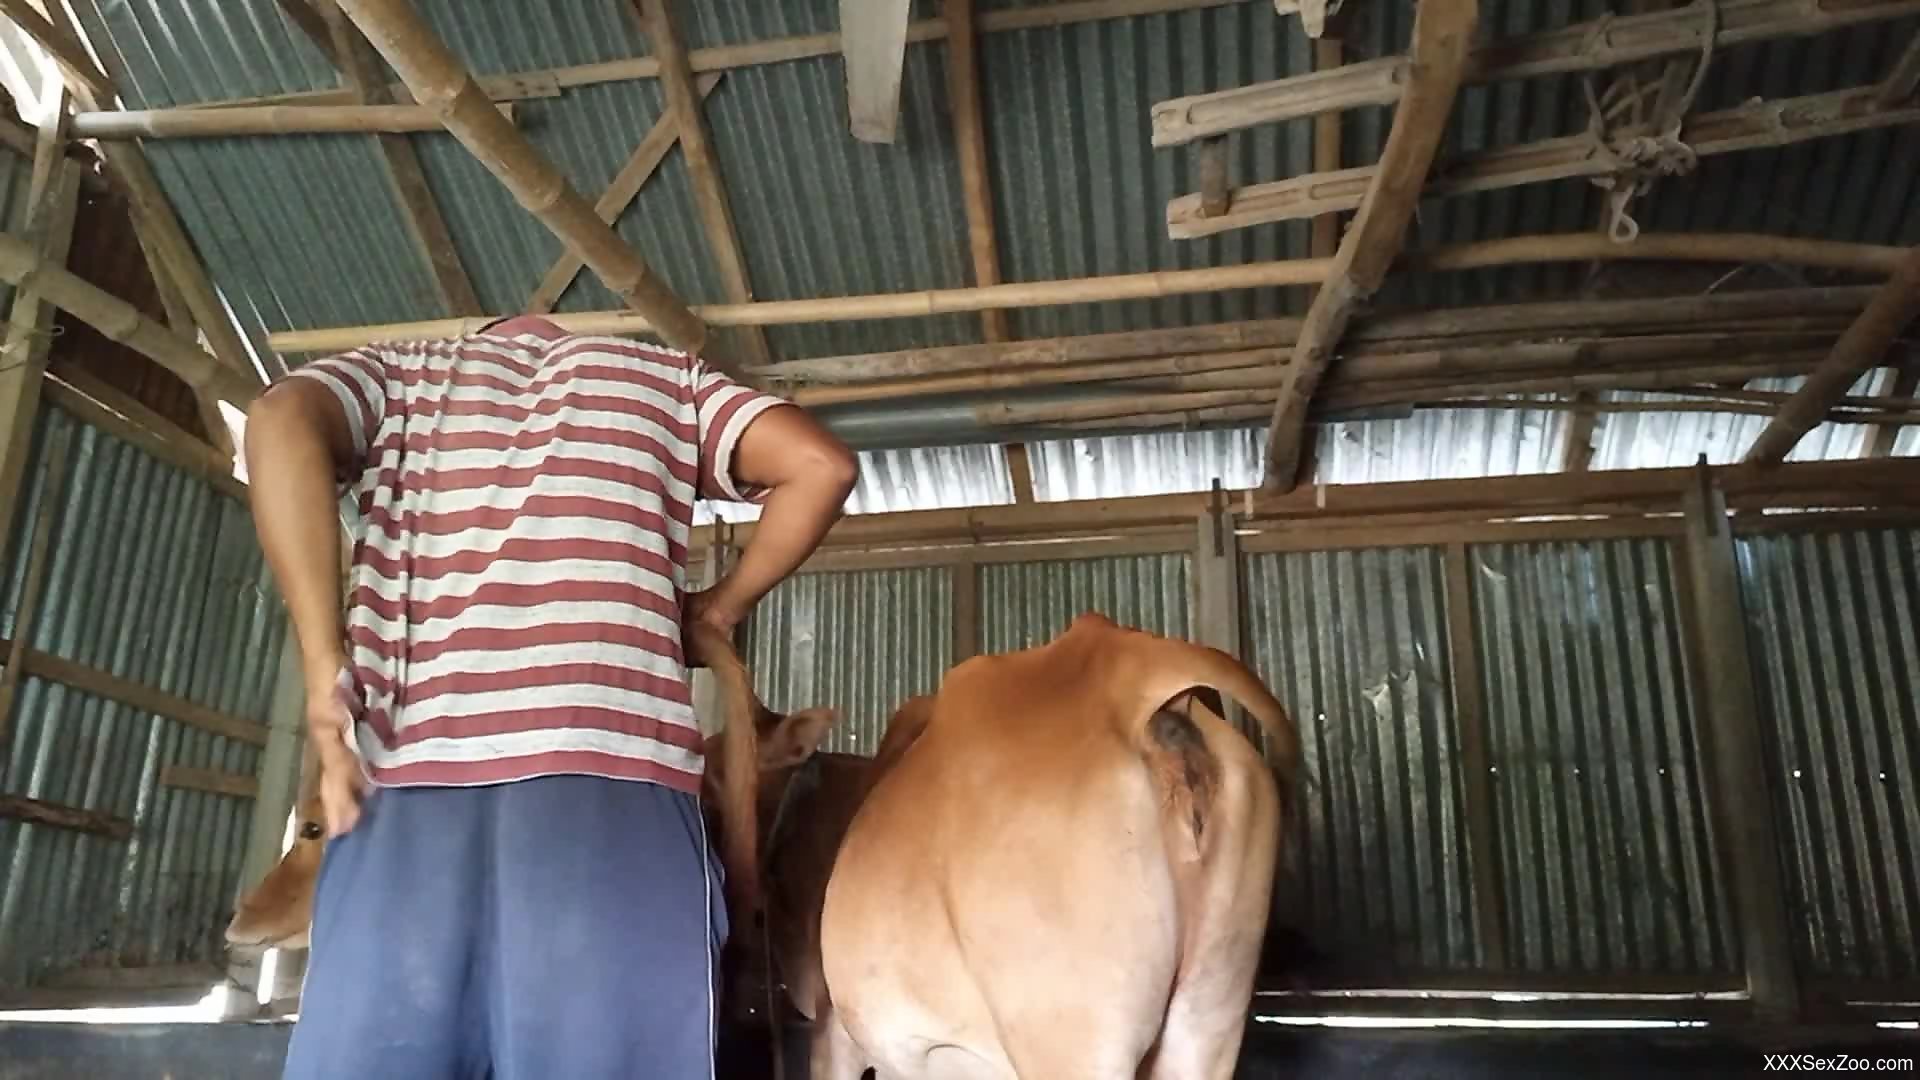 Xxx Cow Video - Horny farm guy craves cow's pussy for a few rounds - XXXSexZoo.com